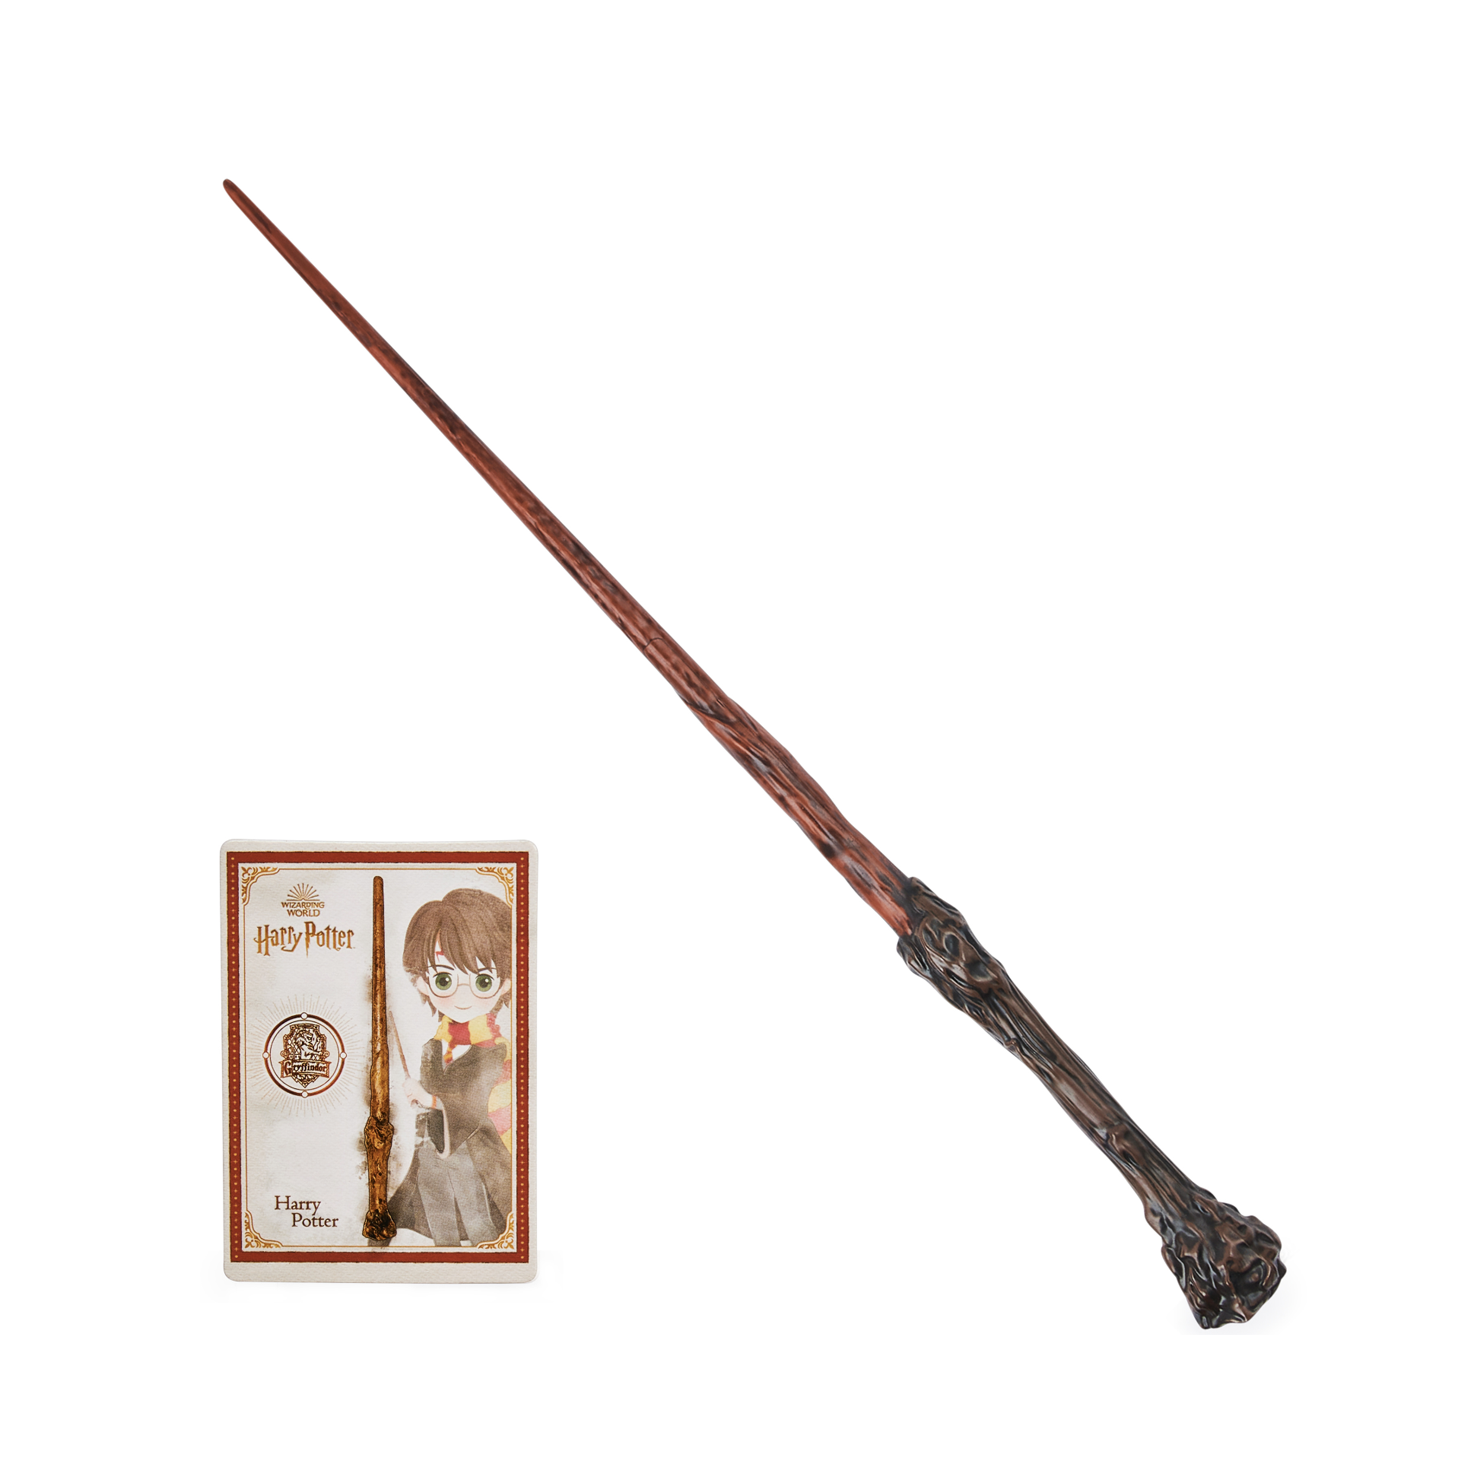 Magic At Play Wand Releasing Harry Potter Quidditch Wand